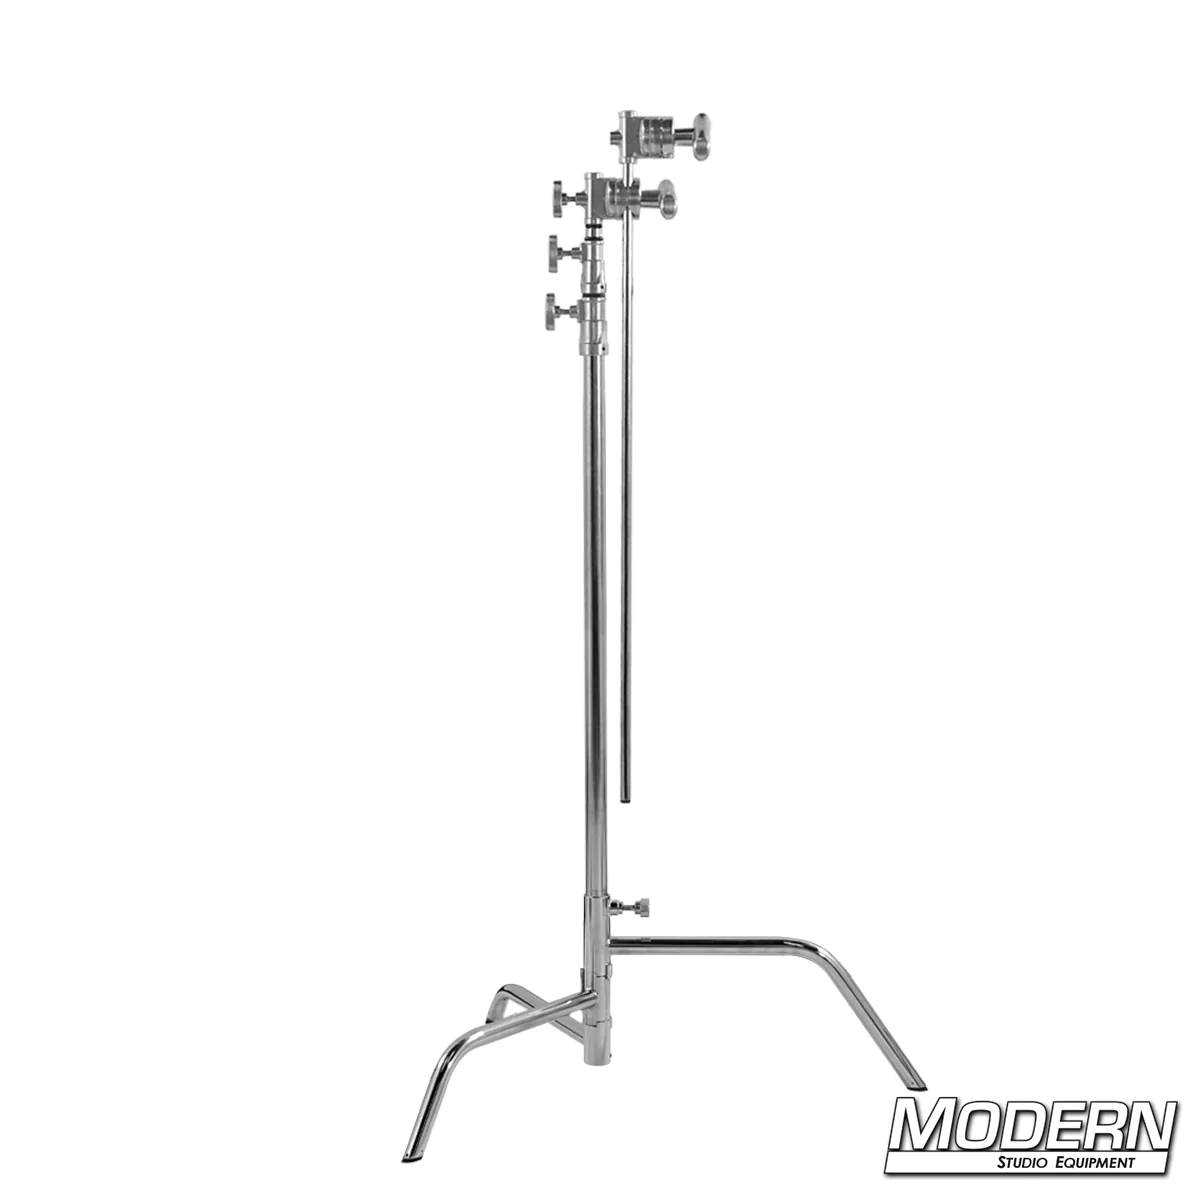 40-inch C-Stand Complete With Grip Head & 40-inch Extension Arm (Norms Brand)